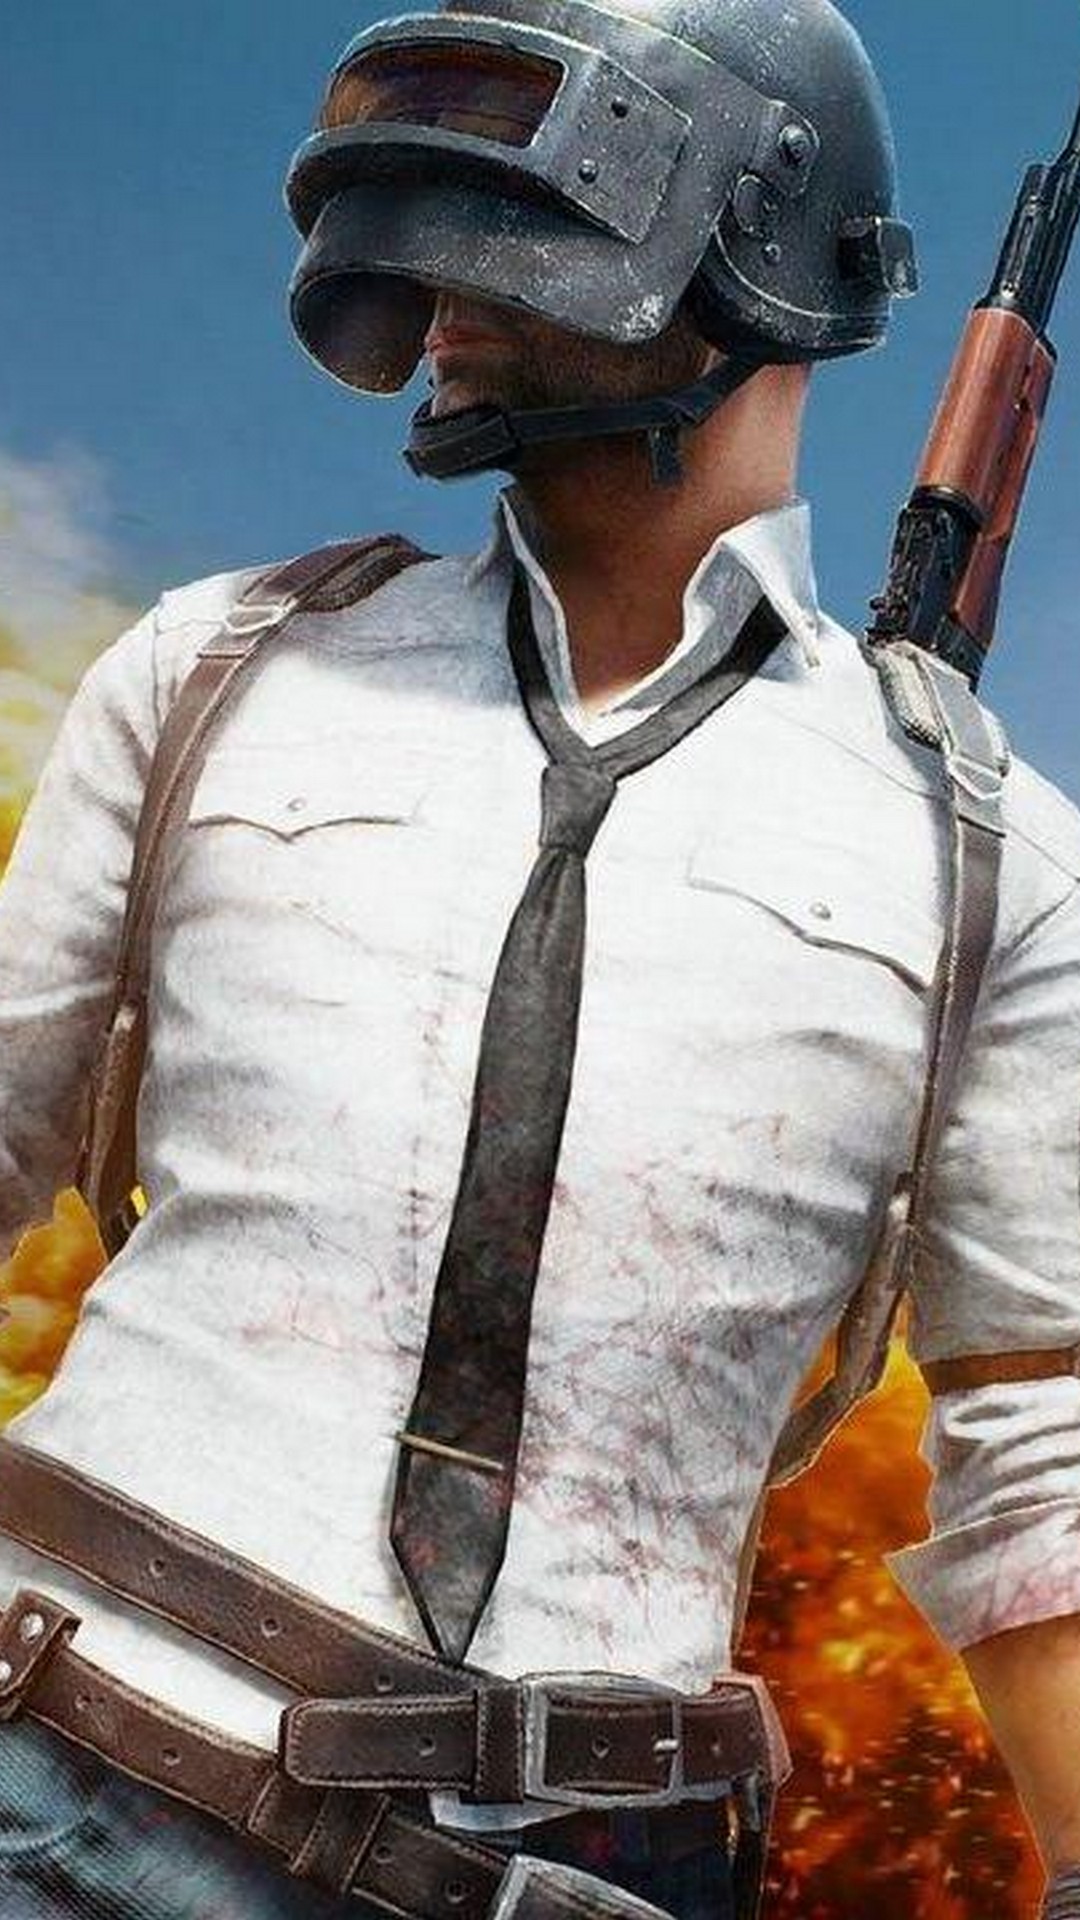 PUBG PS4 Wallpaper iPhone with image resolution 1080x1920 pixel. You can make this wallpaper for your iPhone 5, 6, 7, 8, X backgrounds, Mobile Screensaver, or iPad Lock Screen